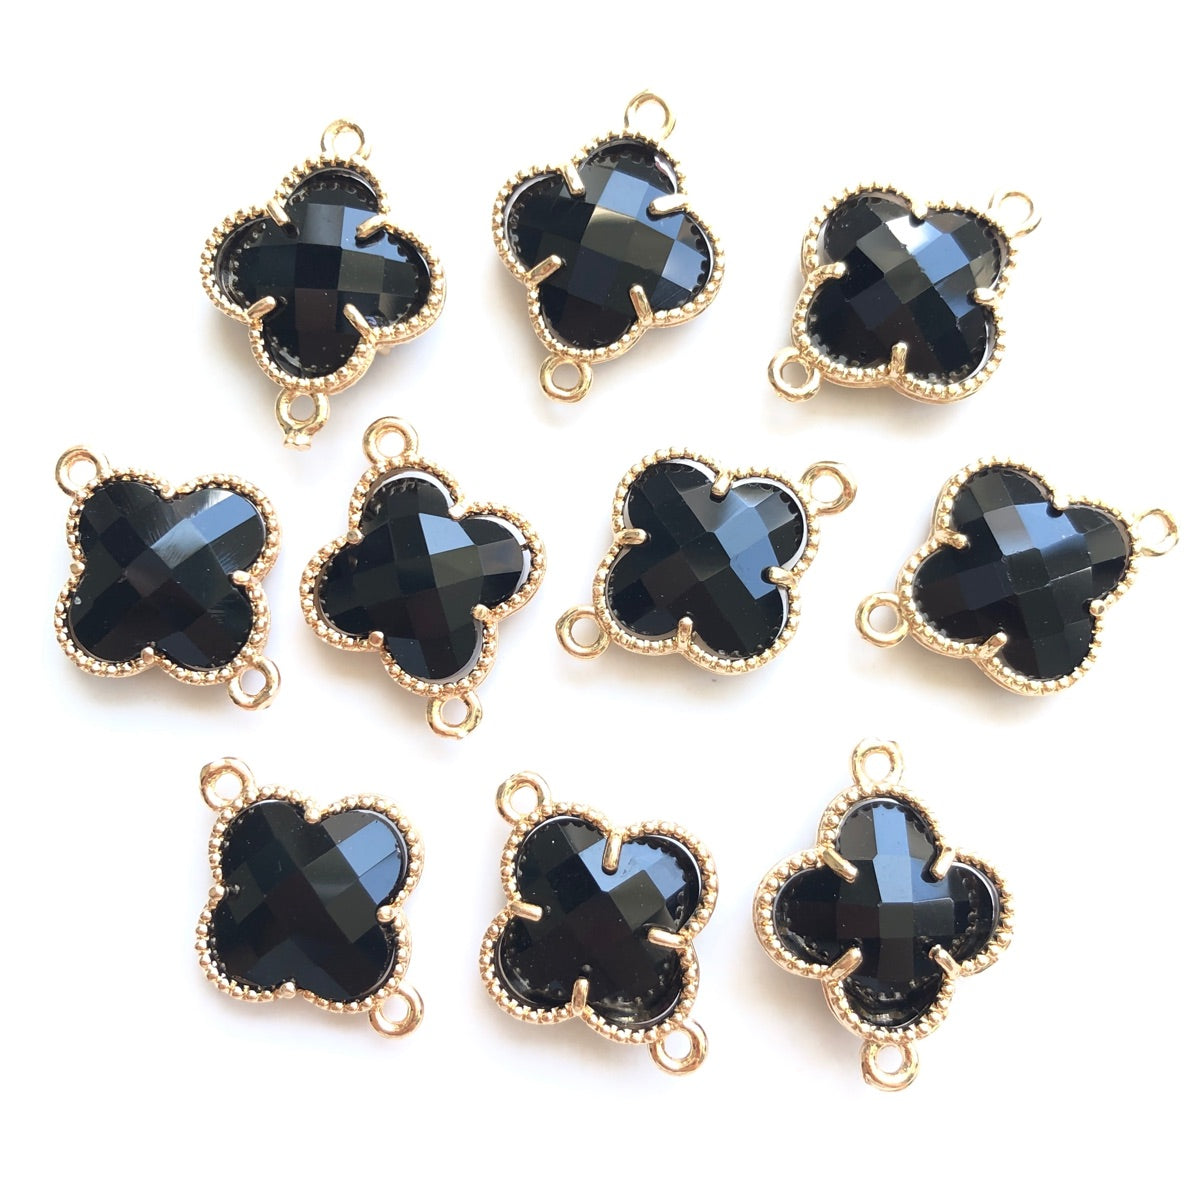 10pcs/Lot Gold Plated Glass Crystal Clover Flower Connectors Black Stone Charms Flower Glass Beads New Charms Arrivals Charms Beads Beyond